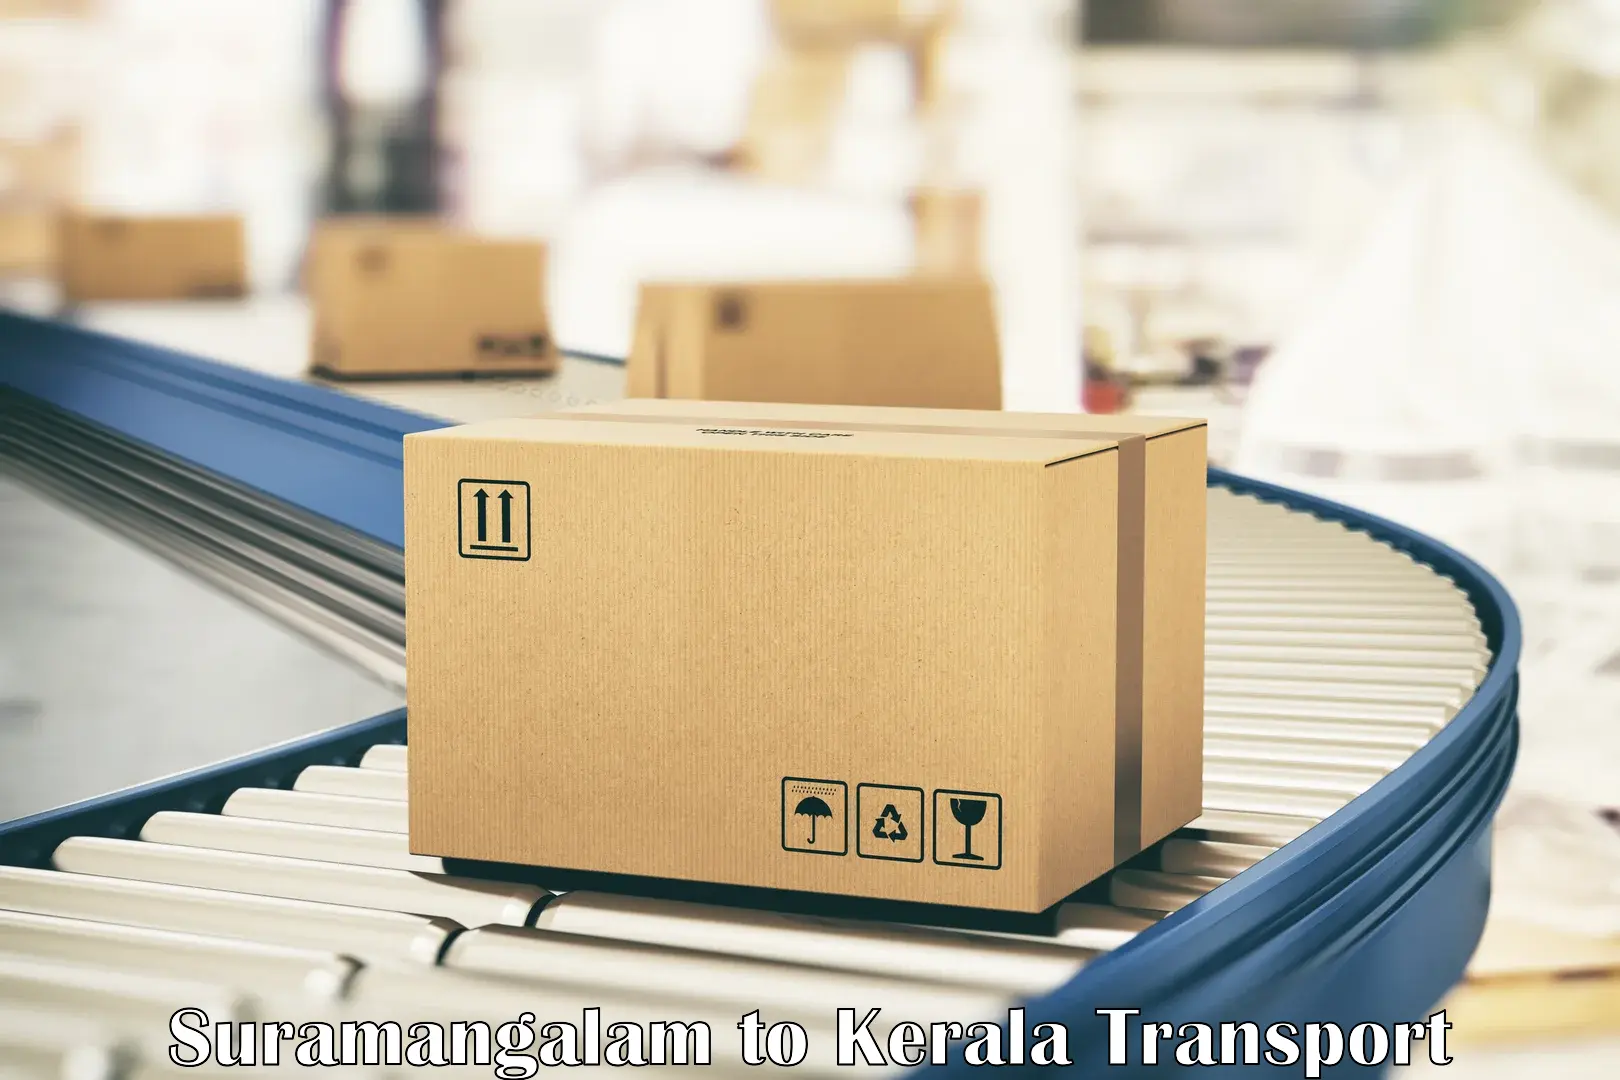 Delivery service Suramangalam to Kollam